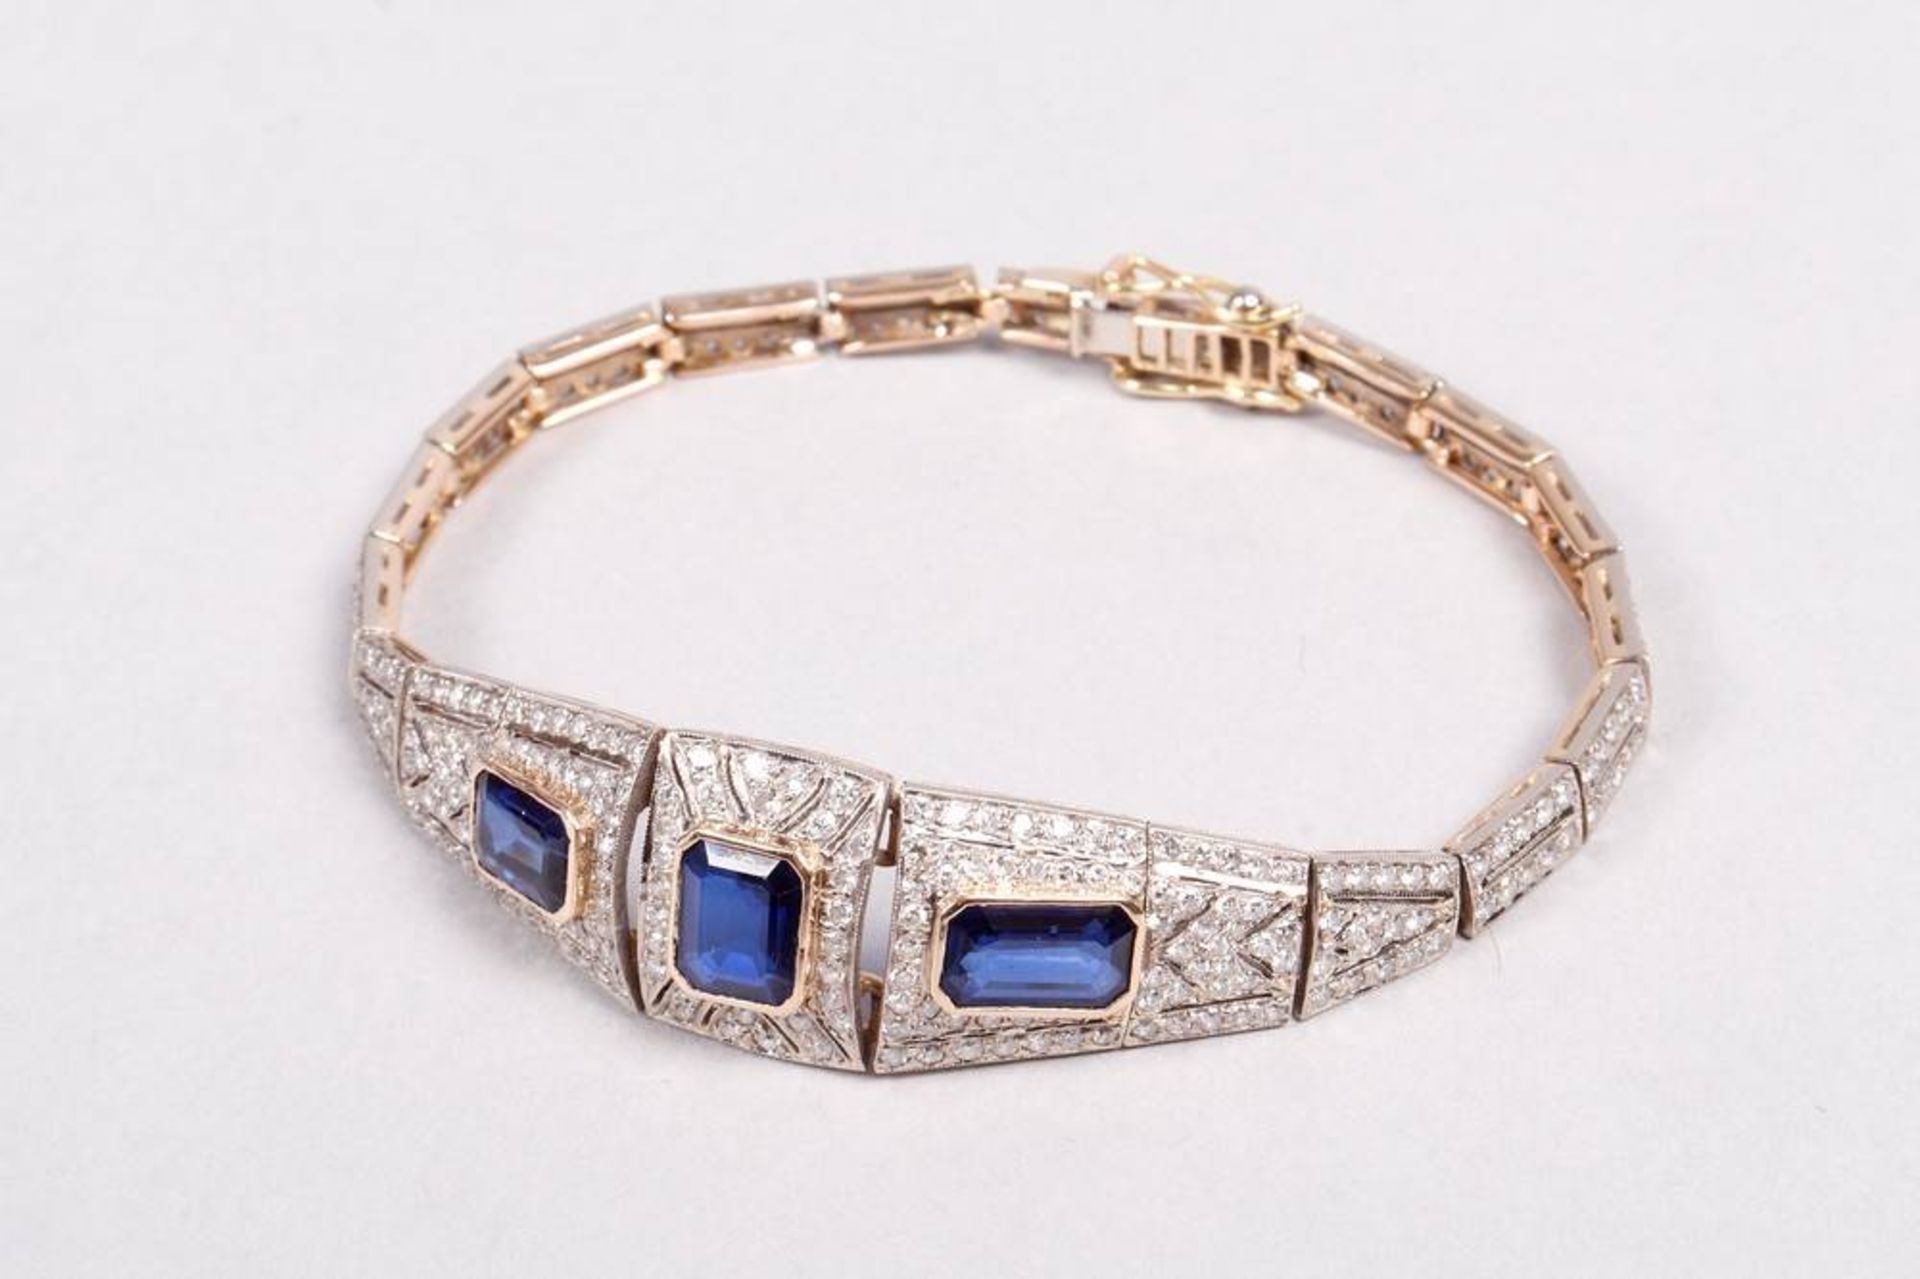 Art Deco bracelet with diamonds and sapphires, 750 gold